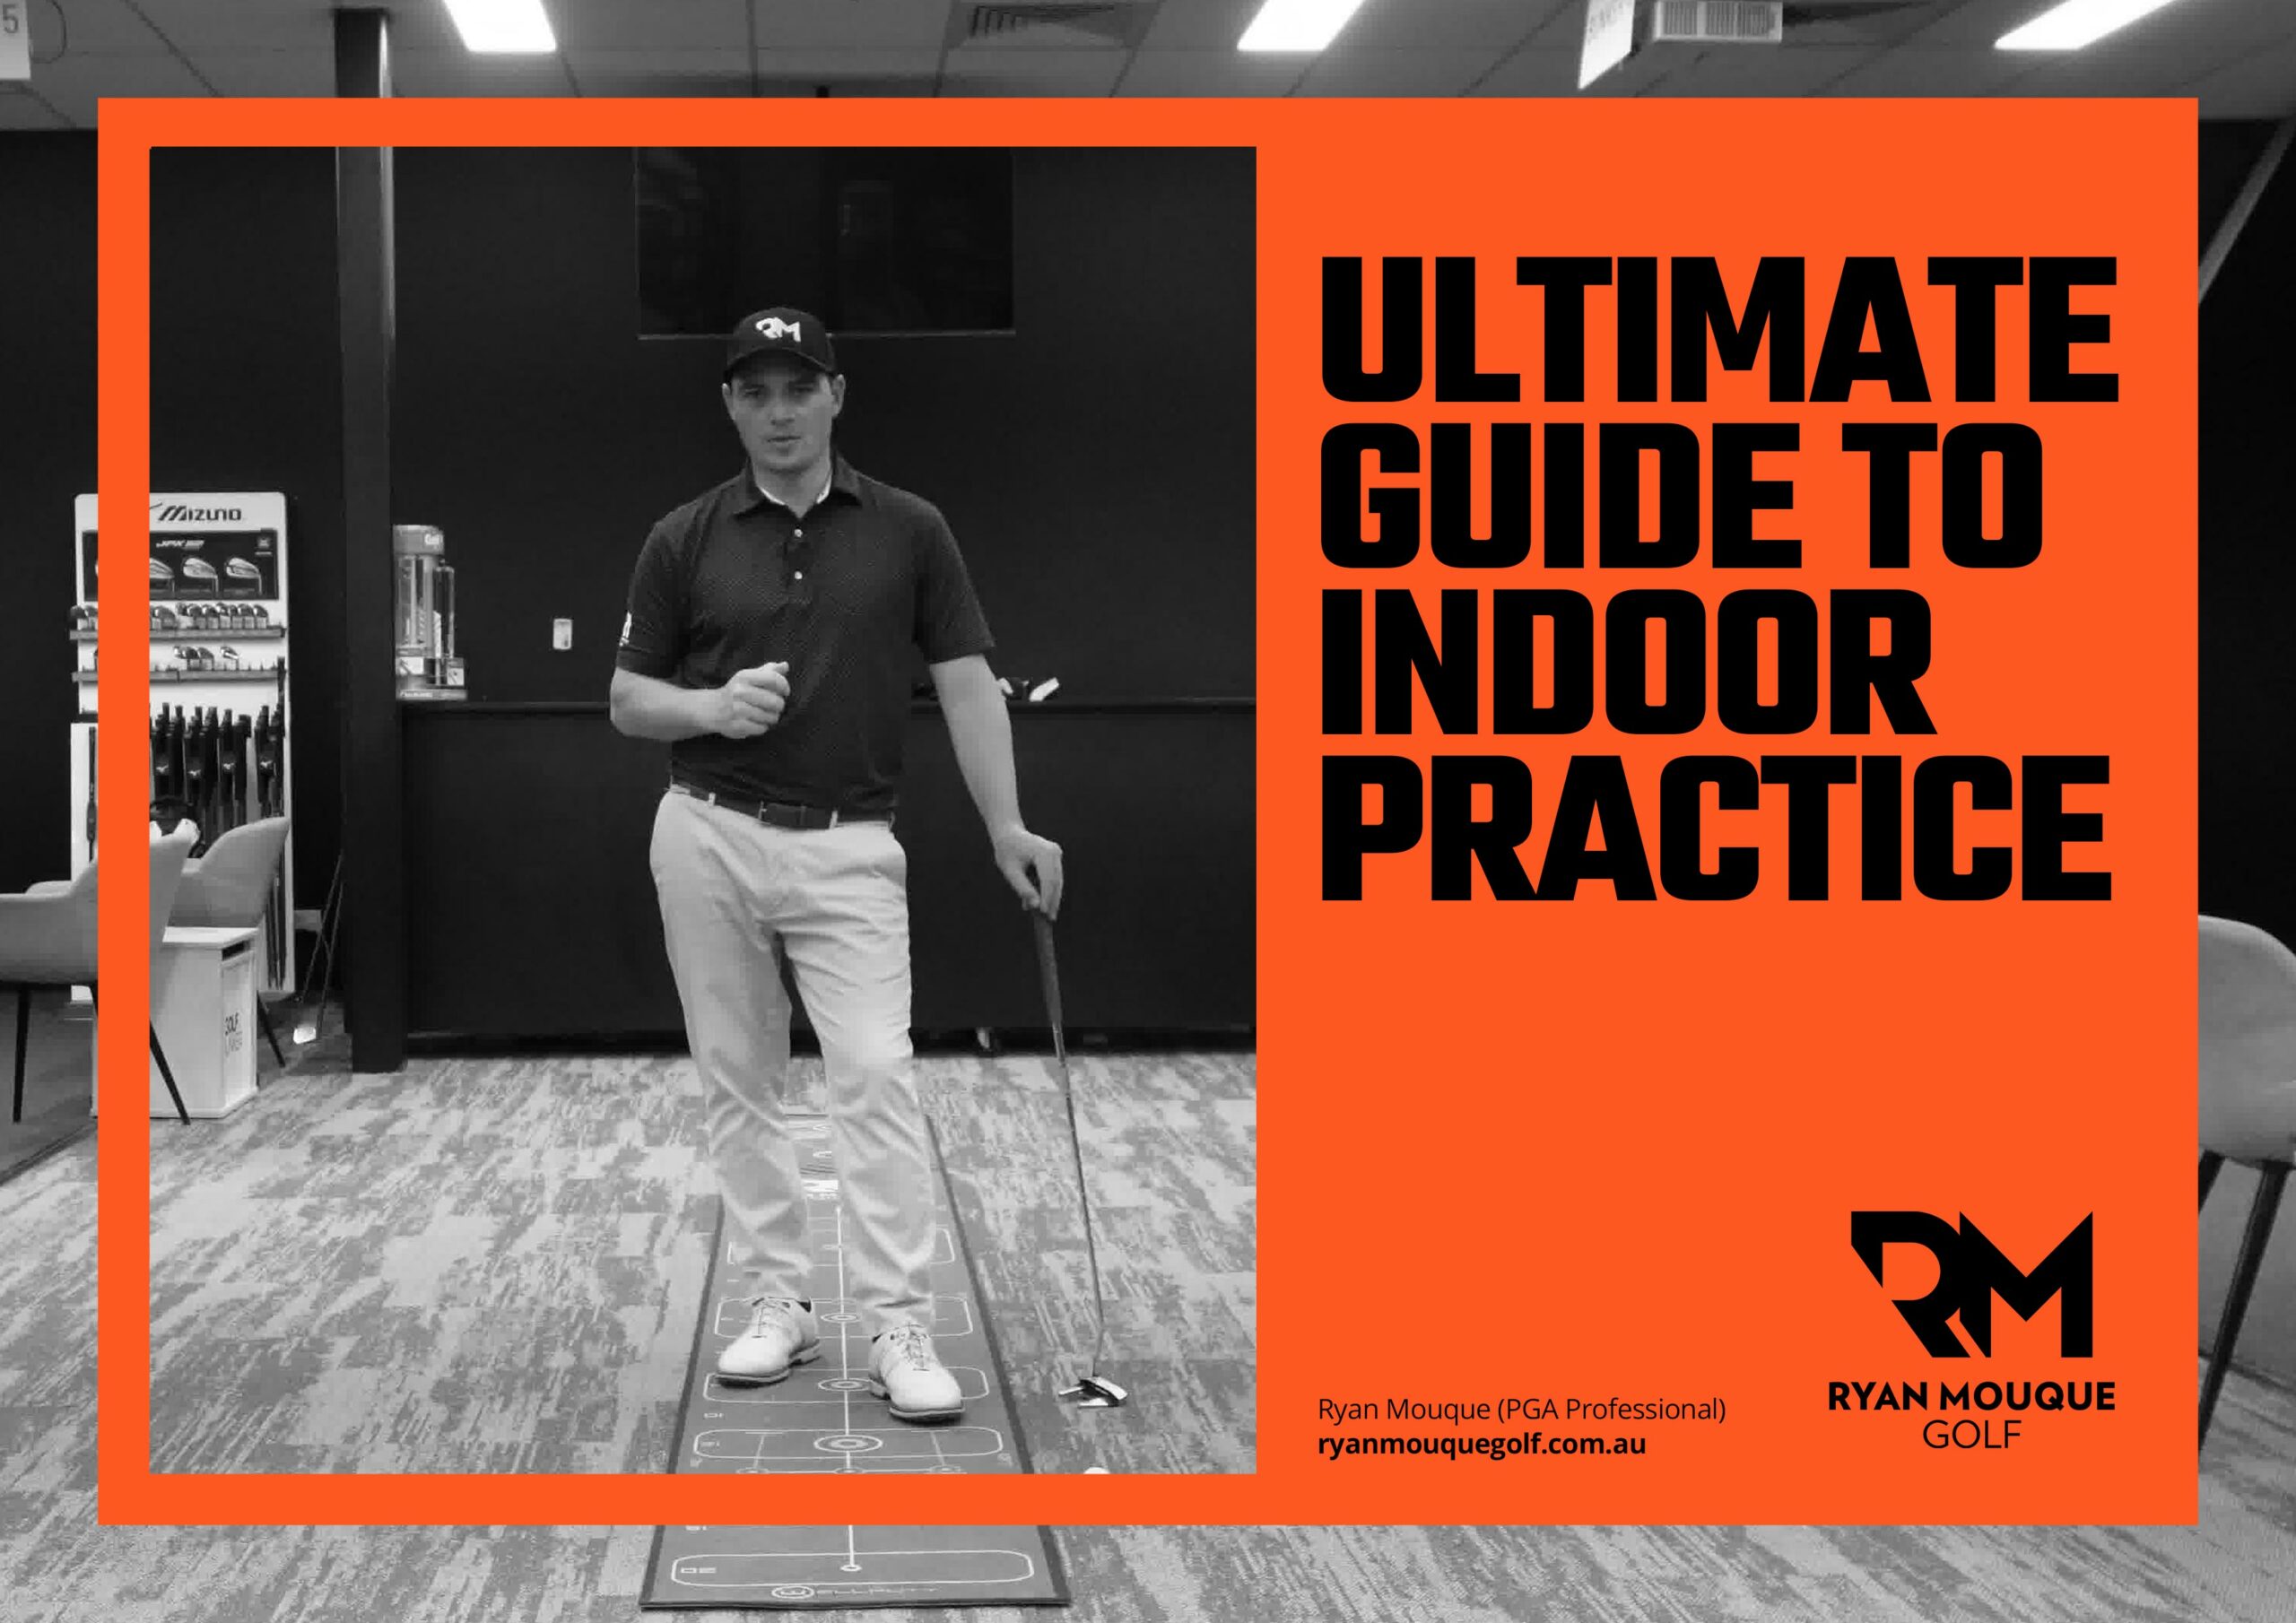 The Ultimate Guide to Indoor Golf Practice